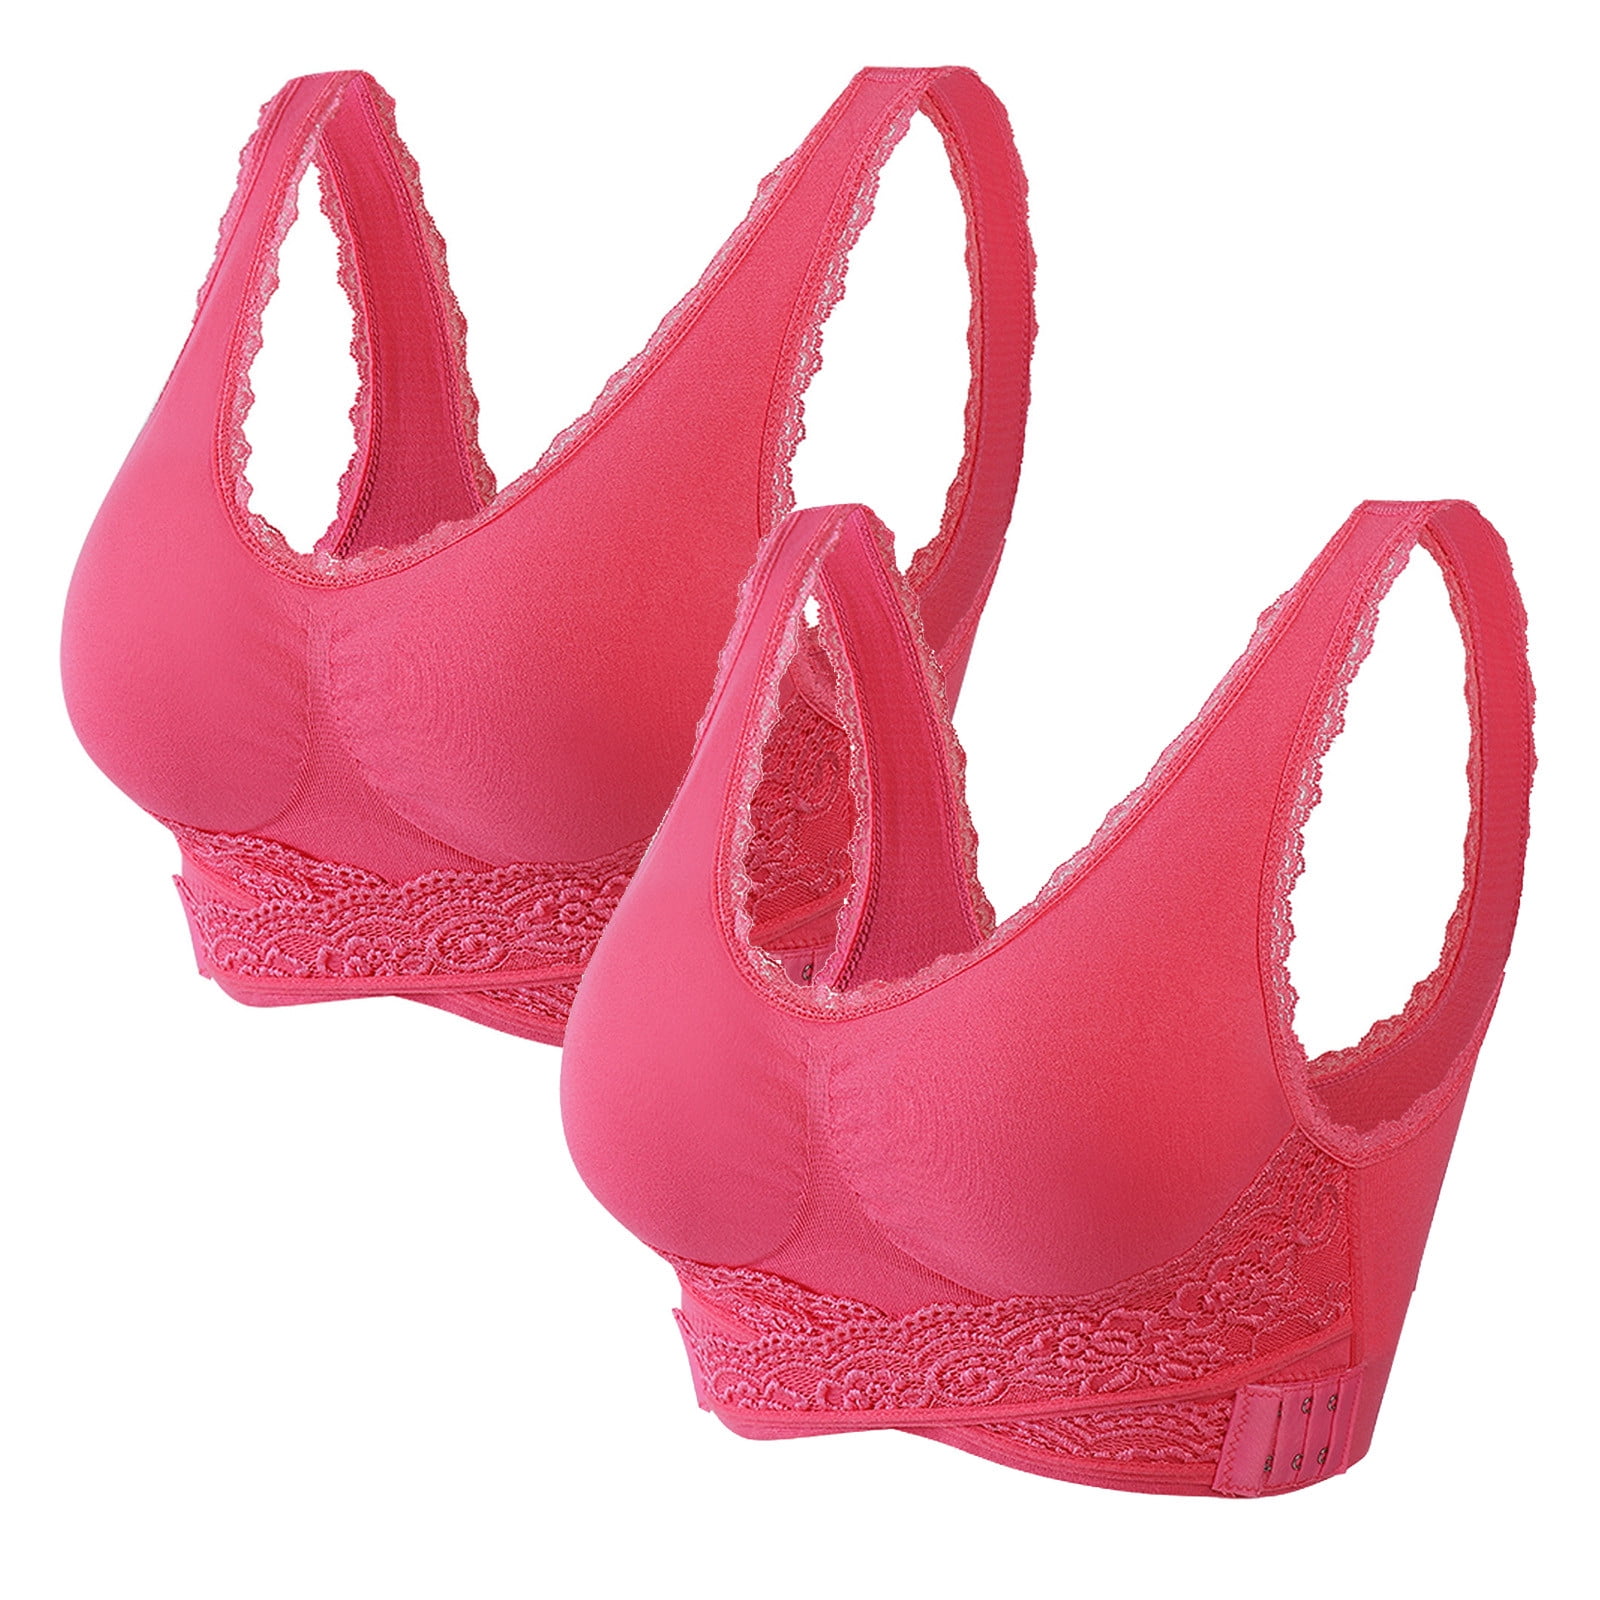 LIBRCLO 2PC Kendally Bra, Kendally Bras, Front Cross Side Buckle